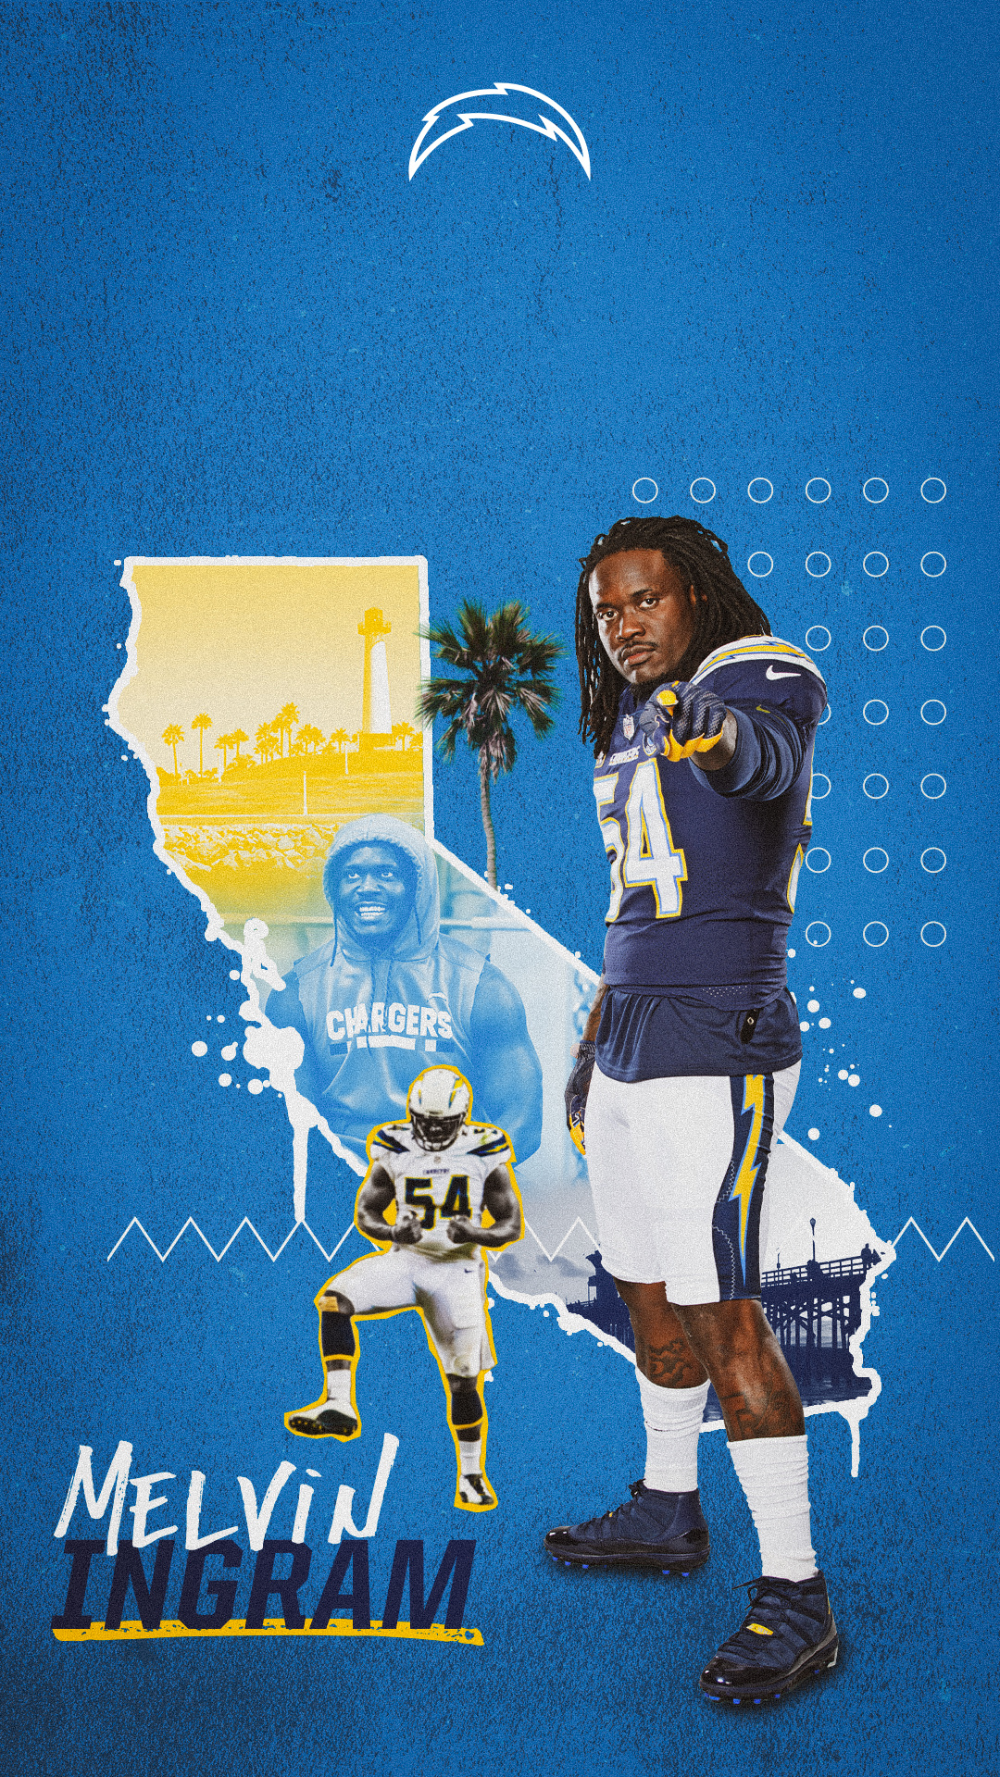 Chargers Wallpaper. Los Angeles Chargers.com. Los angeles chargers, Los angeles, Chargers